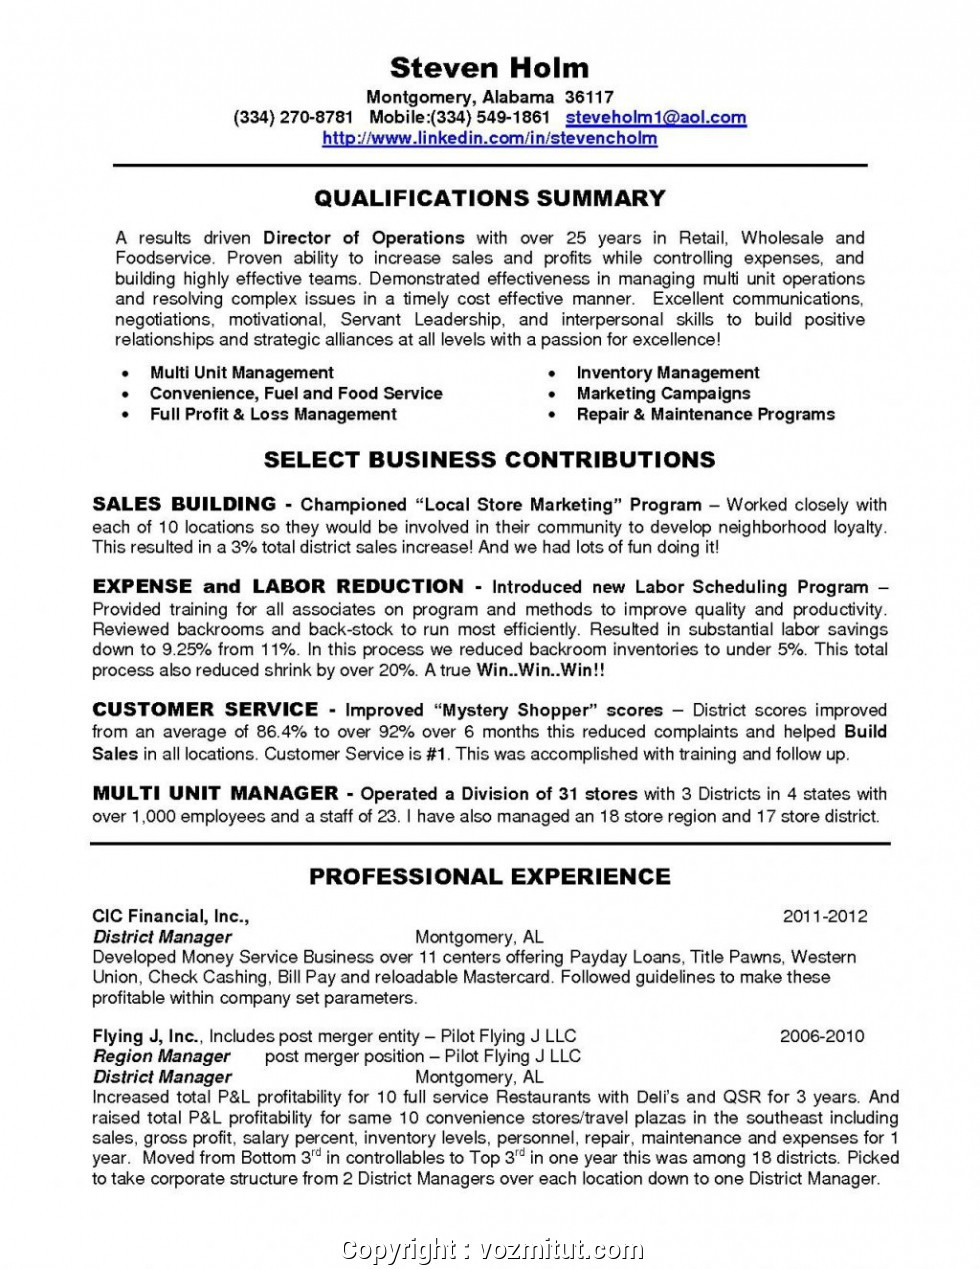 Sample Resume for Hospitality and tourism Management tourism and Hospitality Resume Sample â tourism Company and …